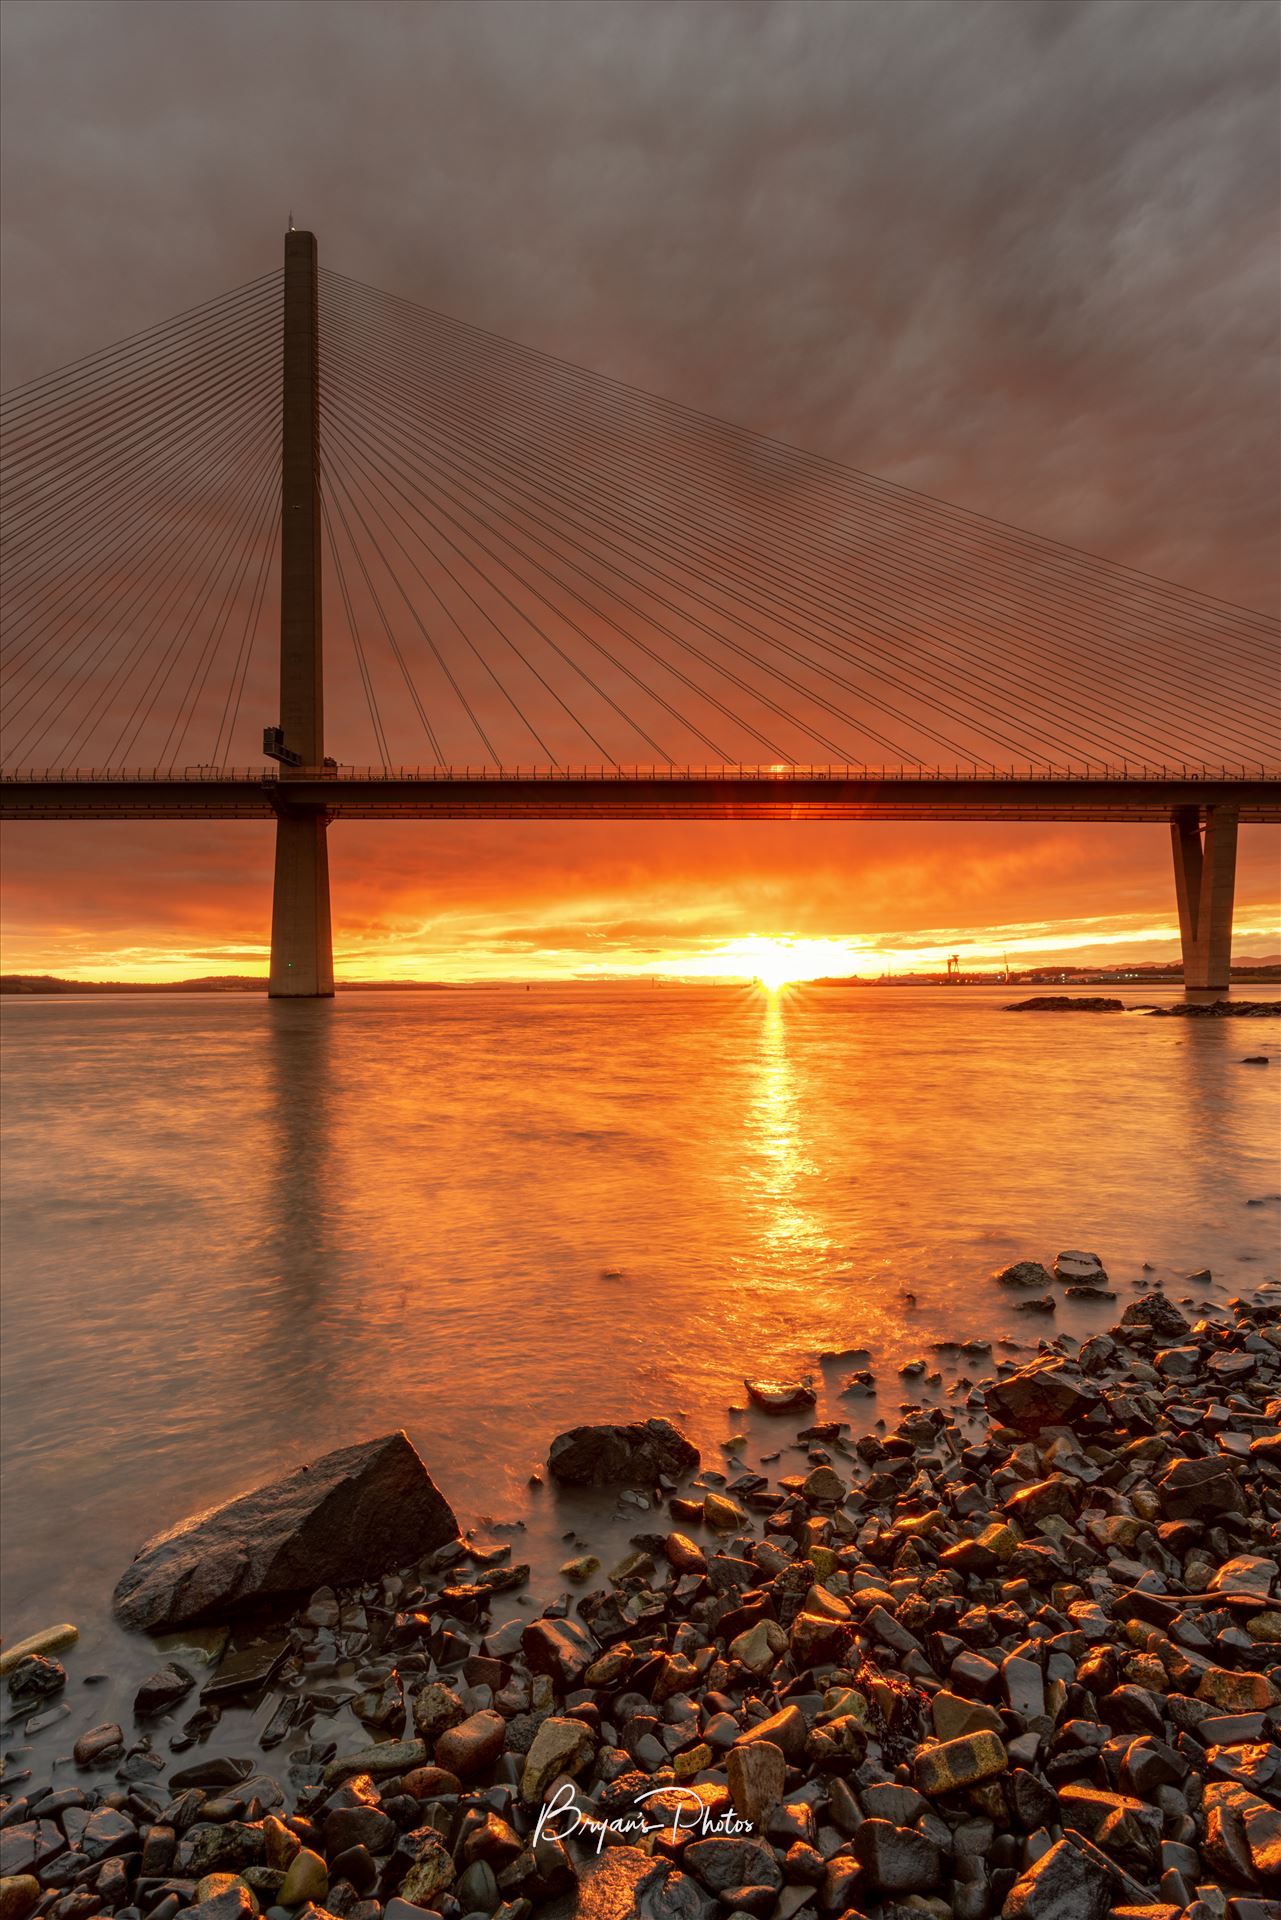 The Crossing at Sunset A photograph of the Queensferry crossing taken at sunset from North Queensferry. by Bryans Photos